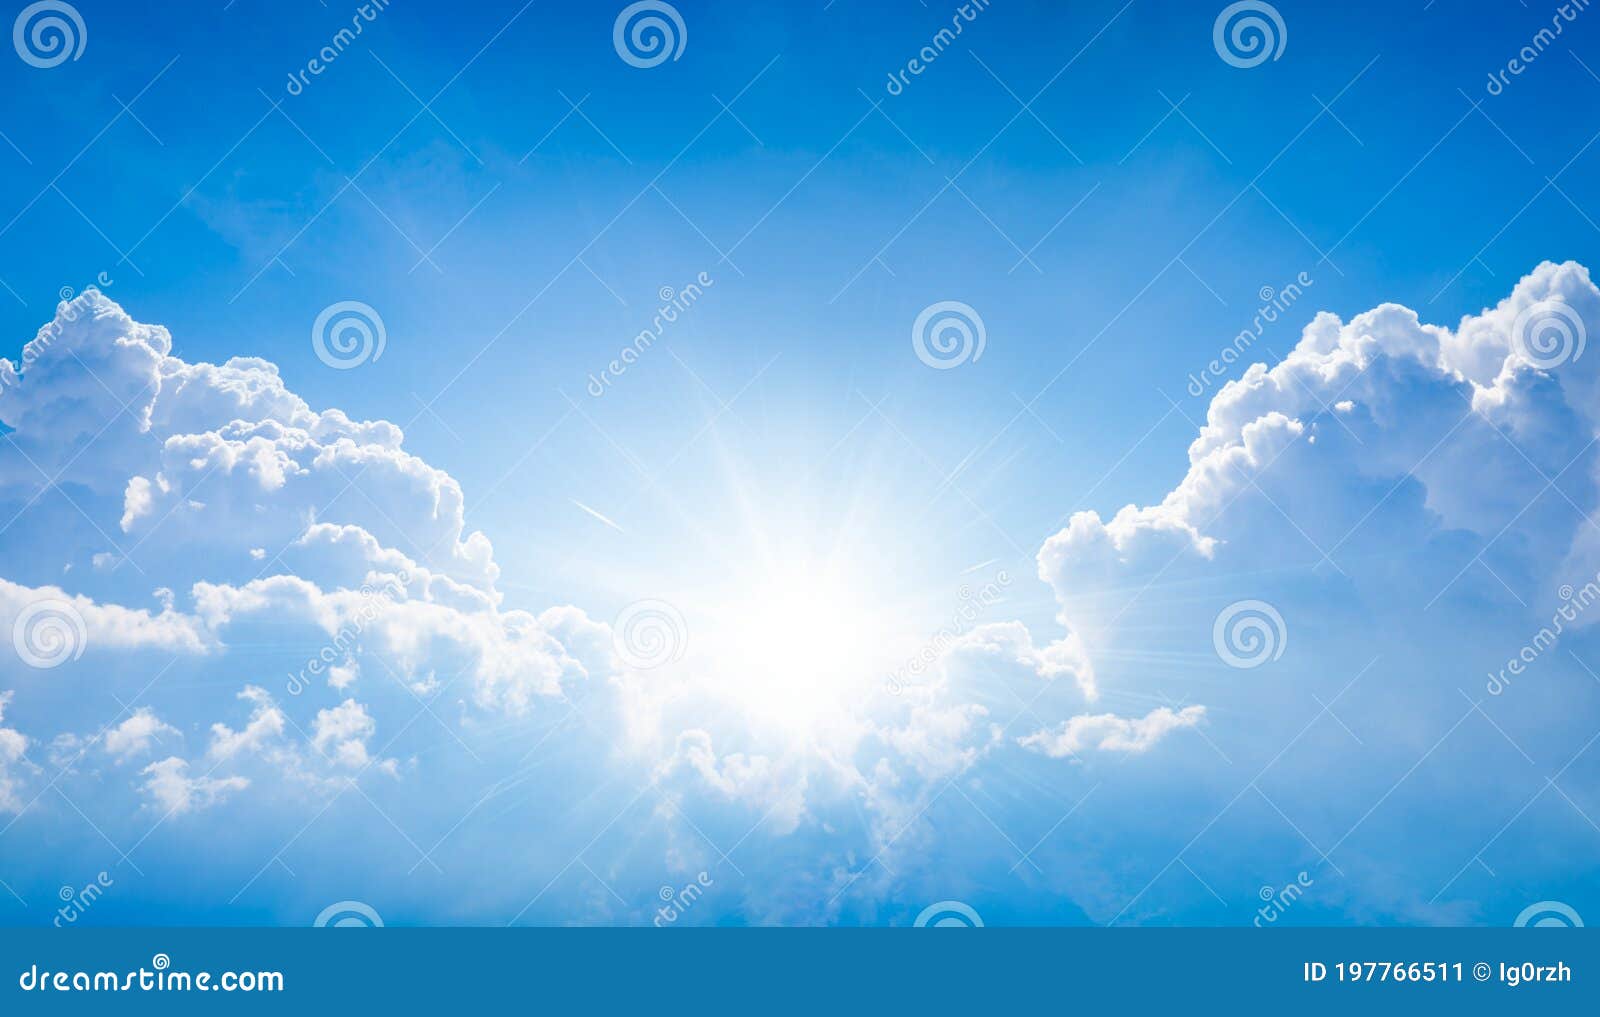 beautiful religious image - bright light from heaven, light of hope and happyness from skies